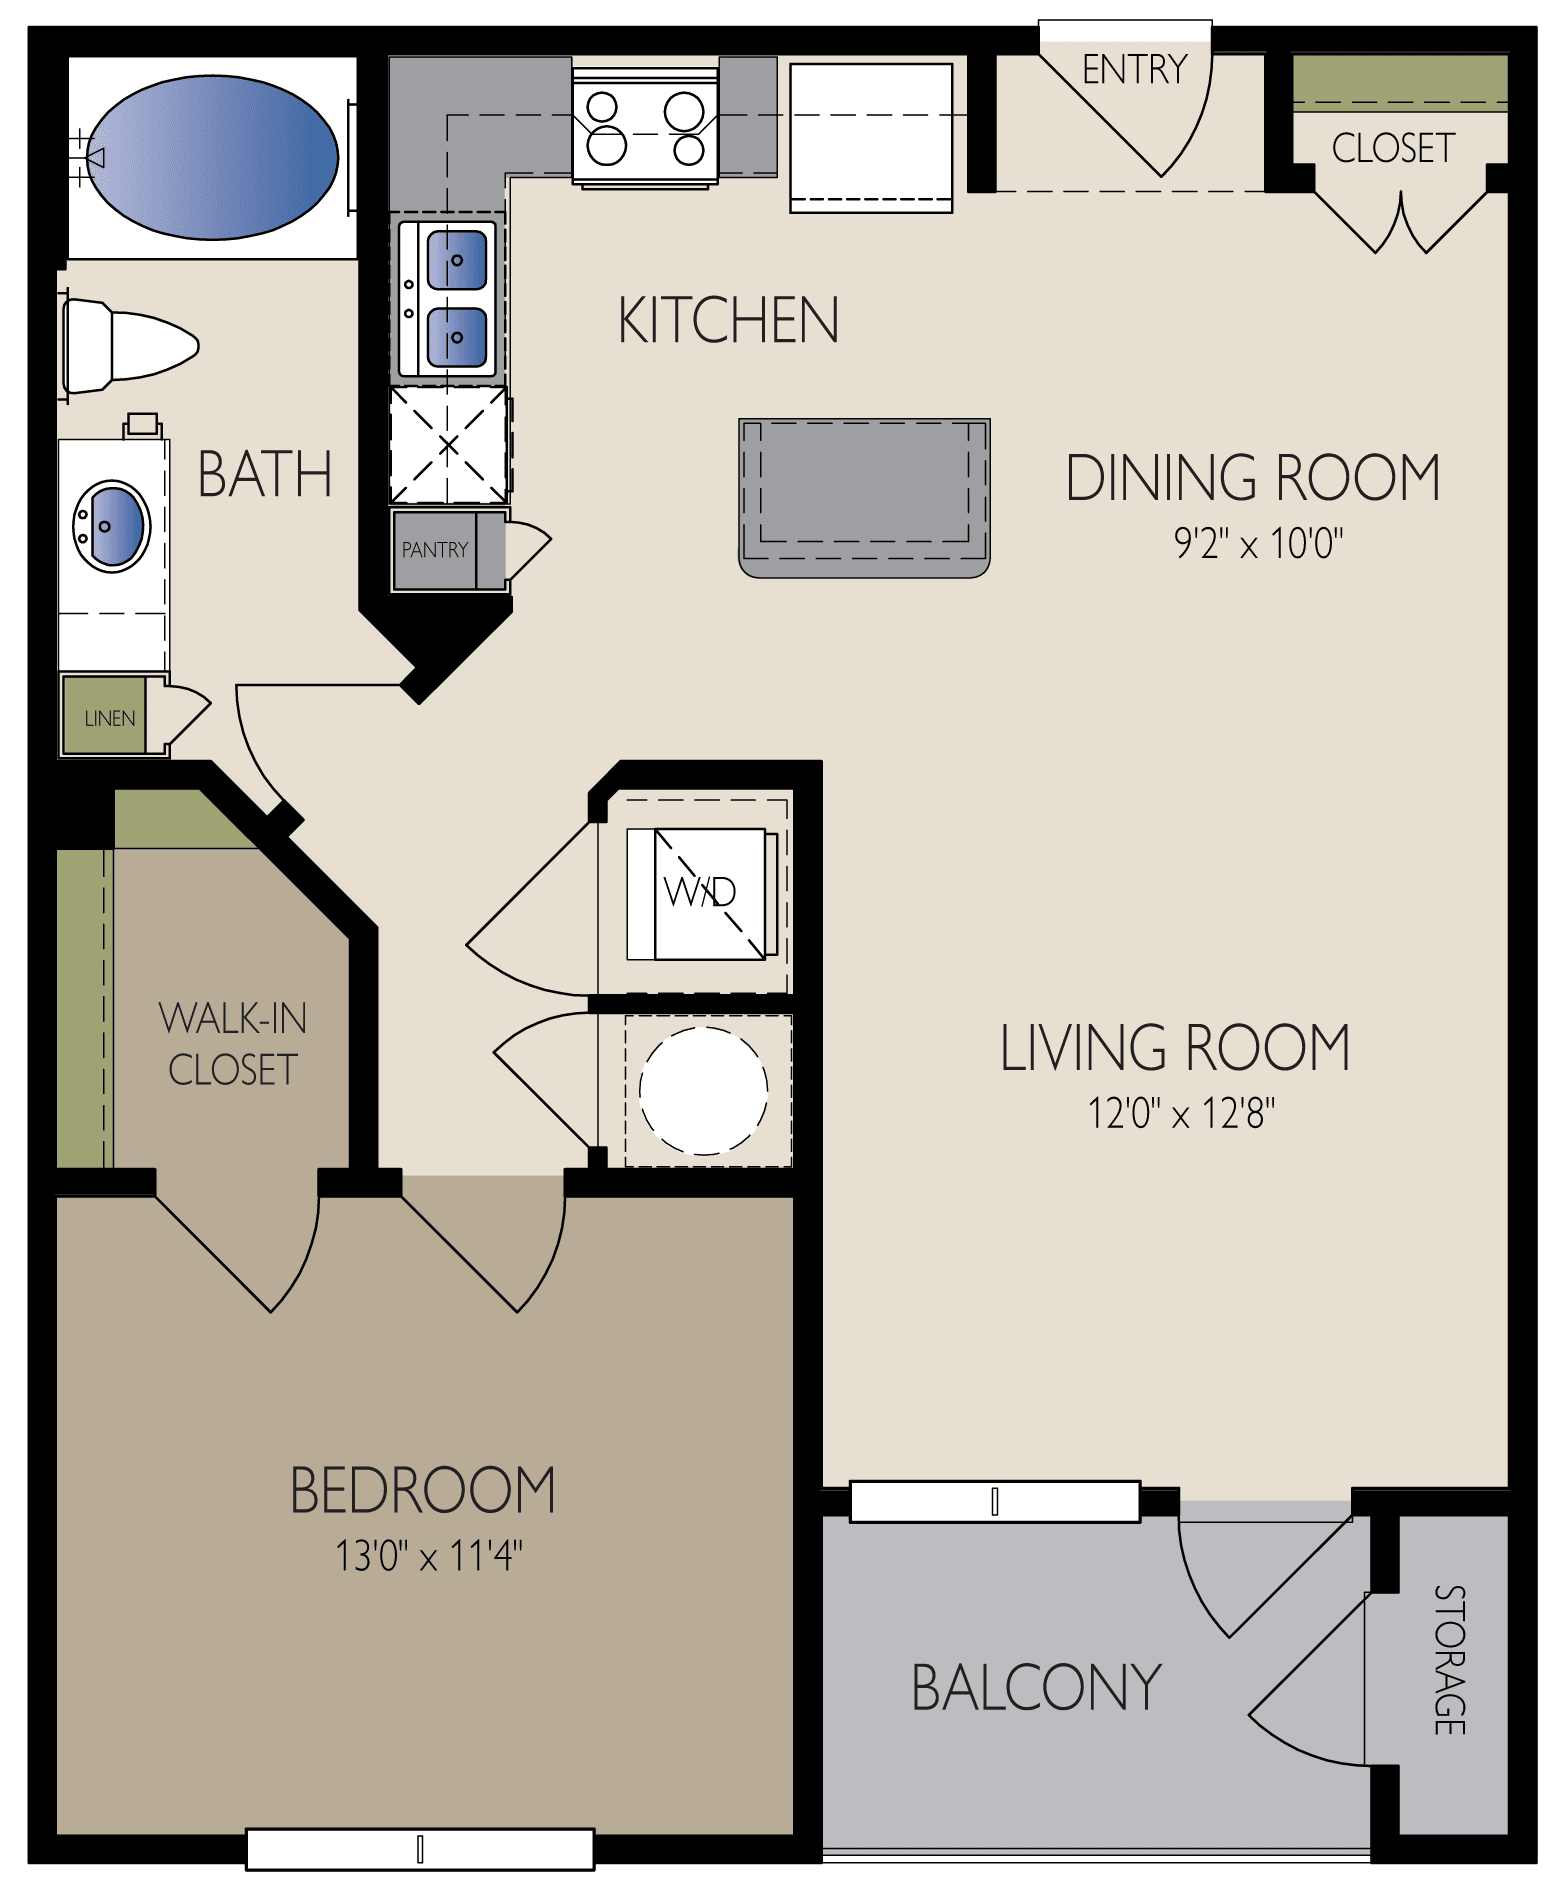 The Grand at Upper Kirby Floor Plan 2